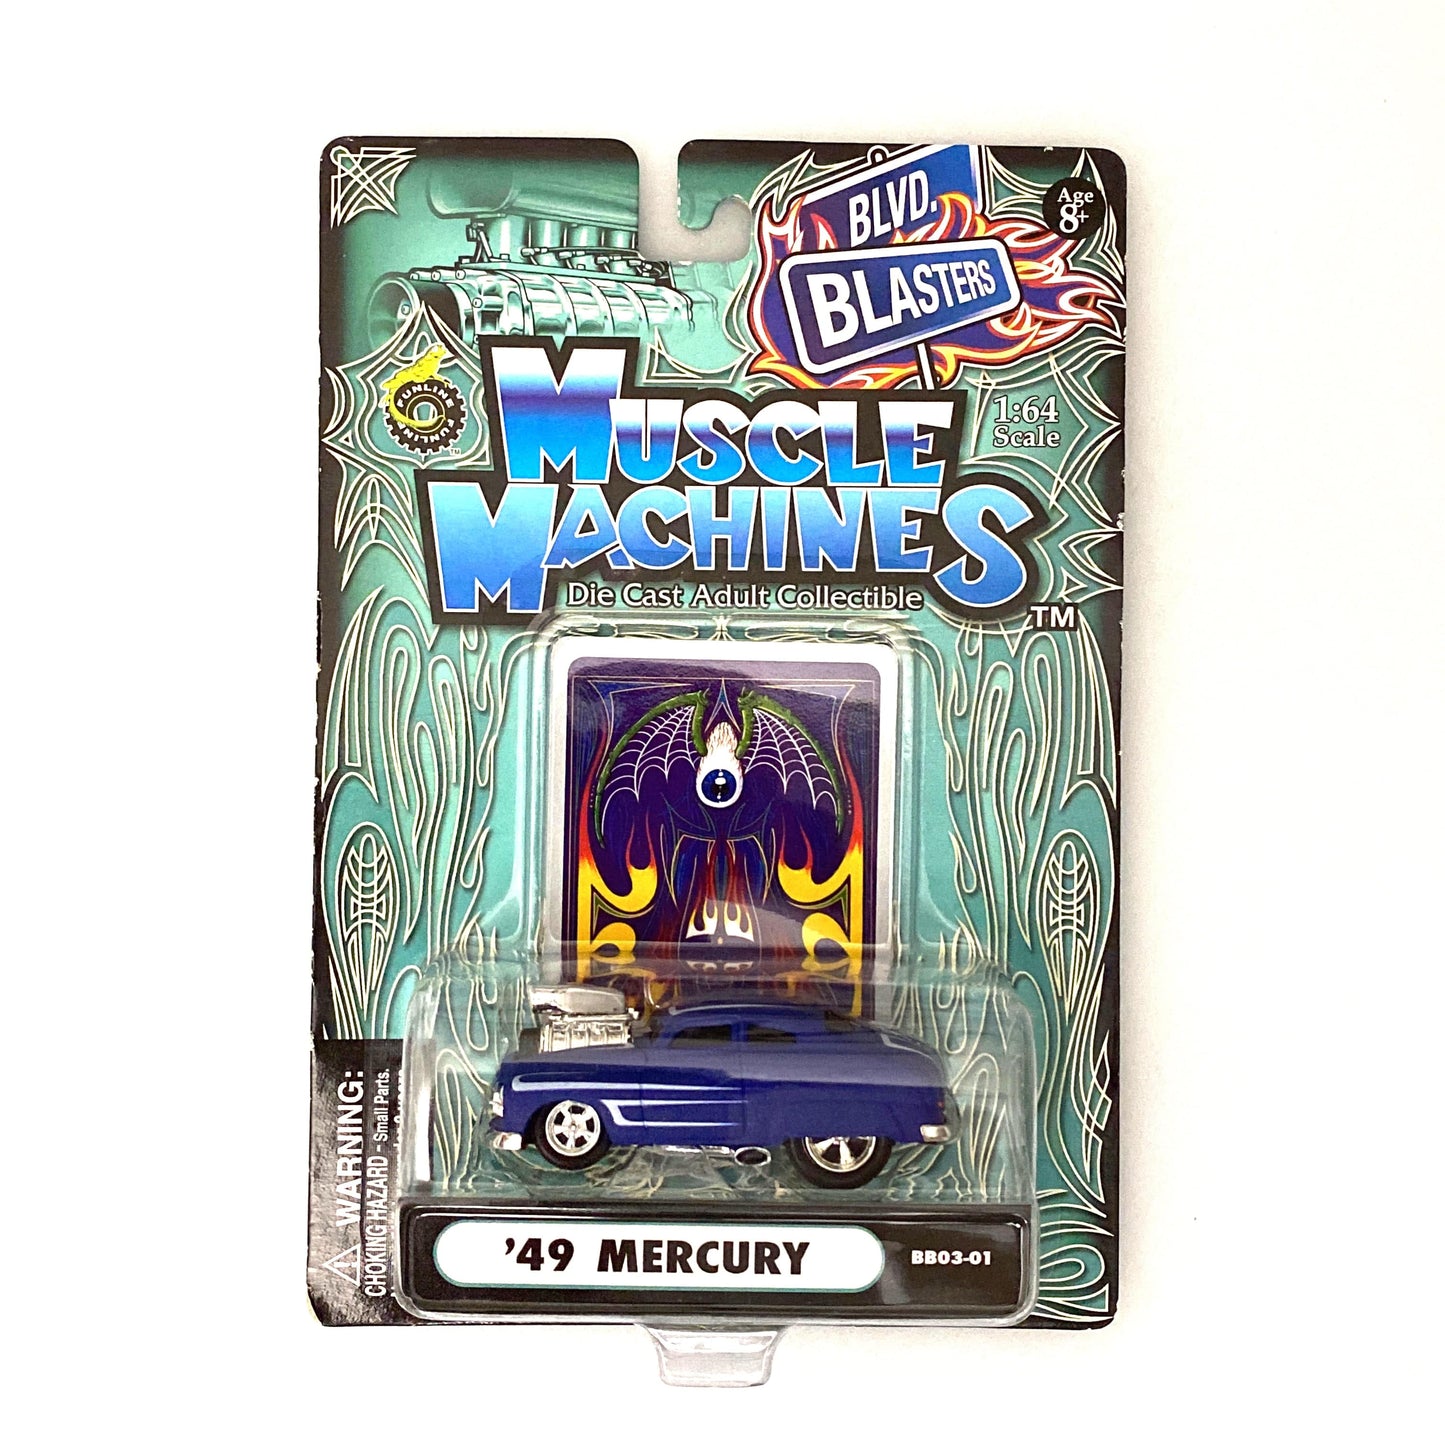 Muscle Machines '49 Mercury Blue Diecast Collectible Car 1:64 Scale Model #BB03-01 BLVD BLASTERS